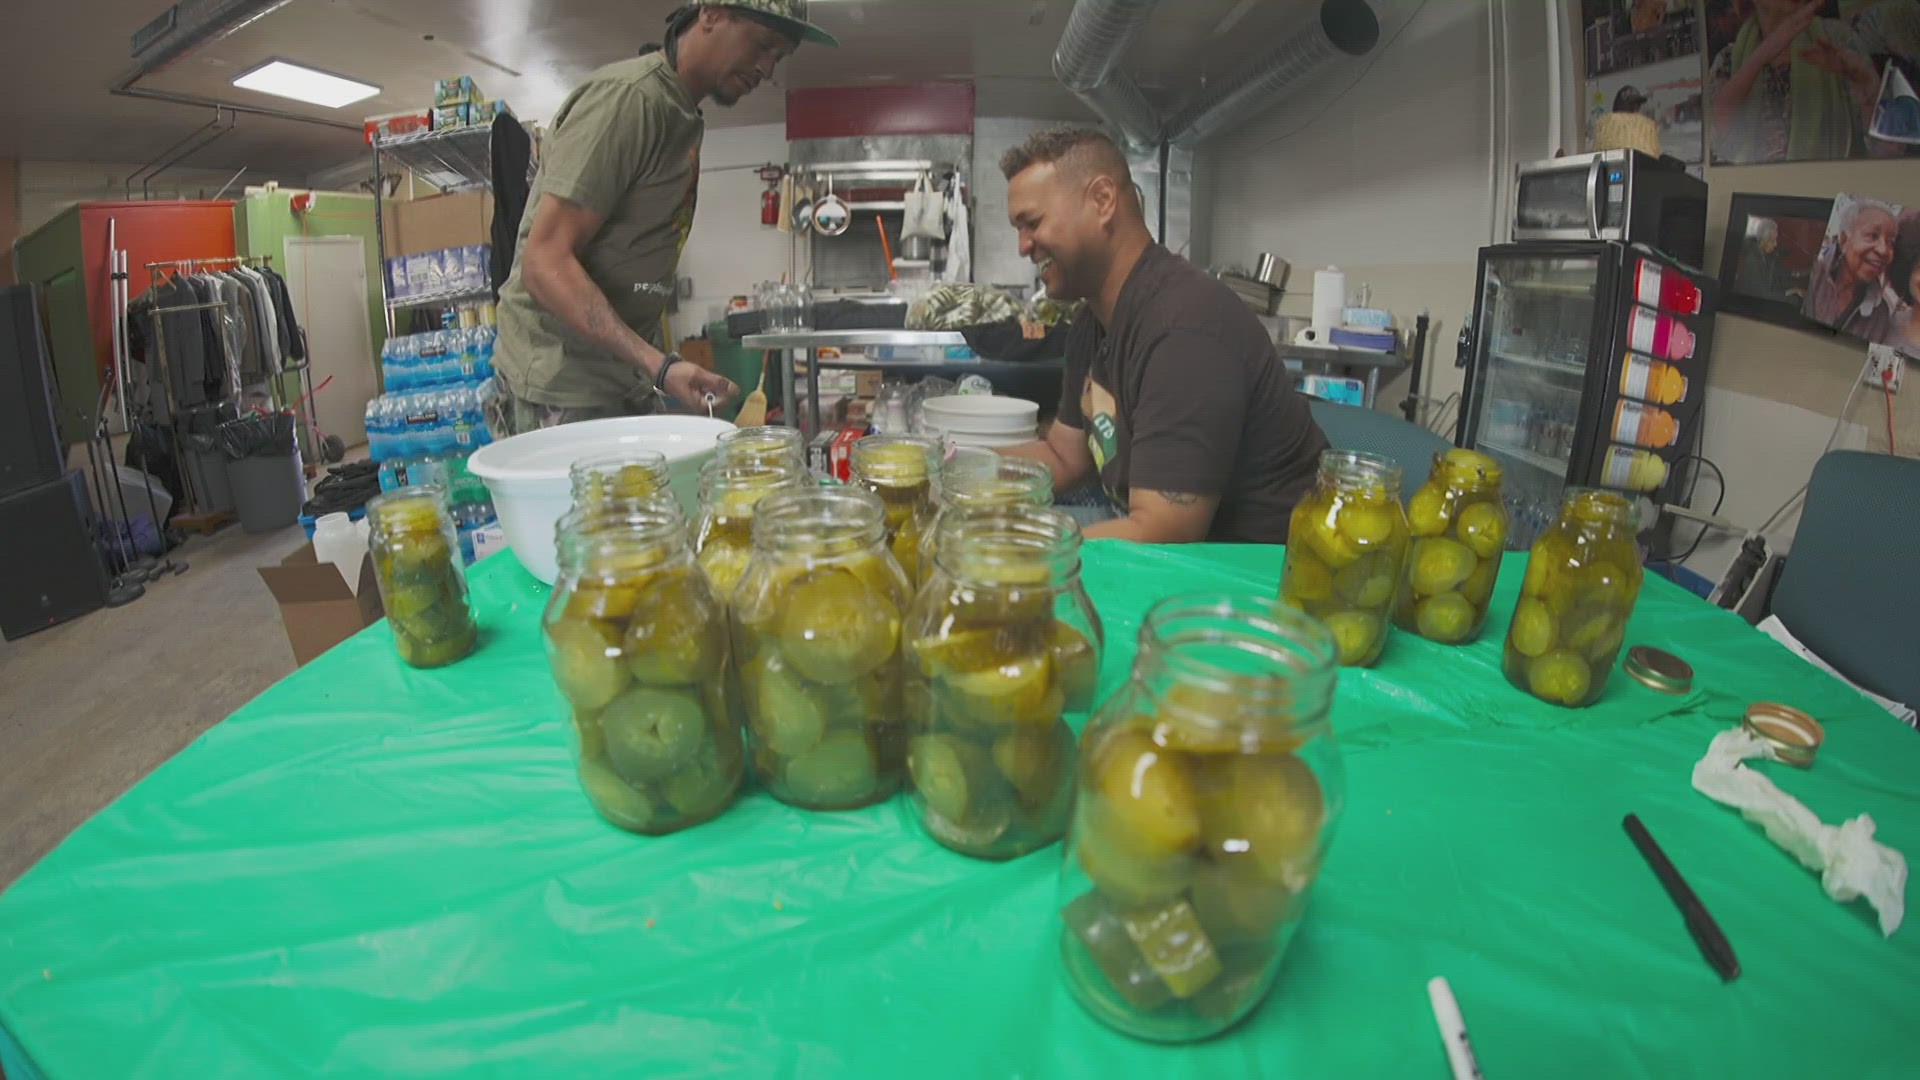 People's Pickles is a community-driven job training program that helps marginalized individuals, like people coming out of homelessness, prison or rehab.